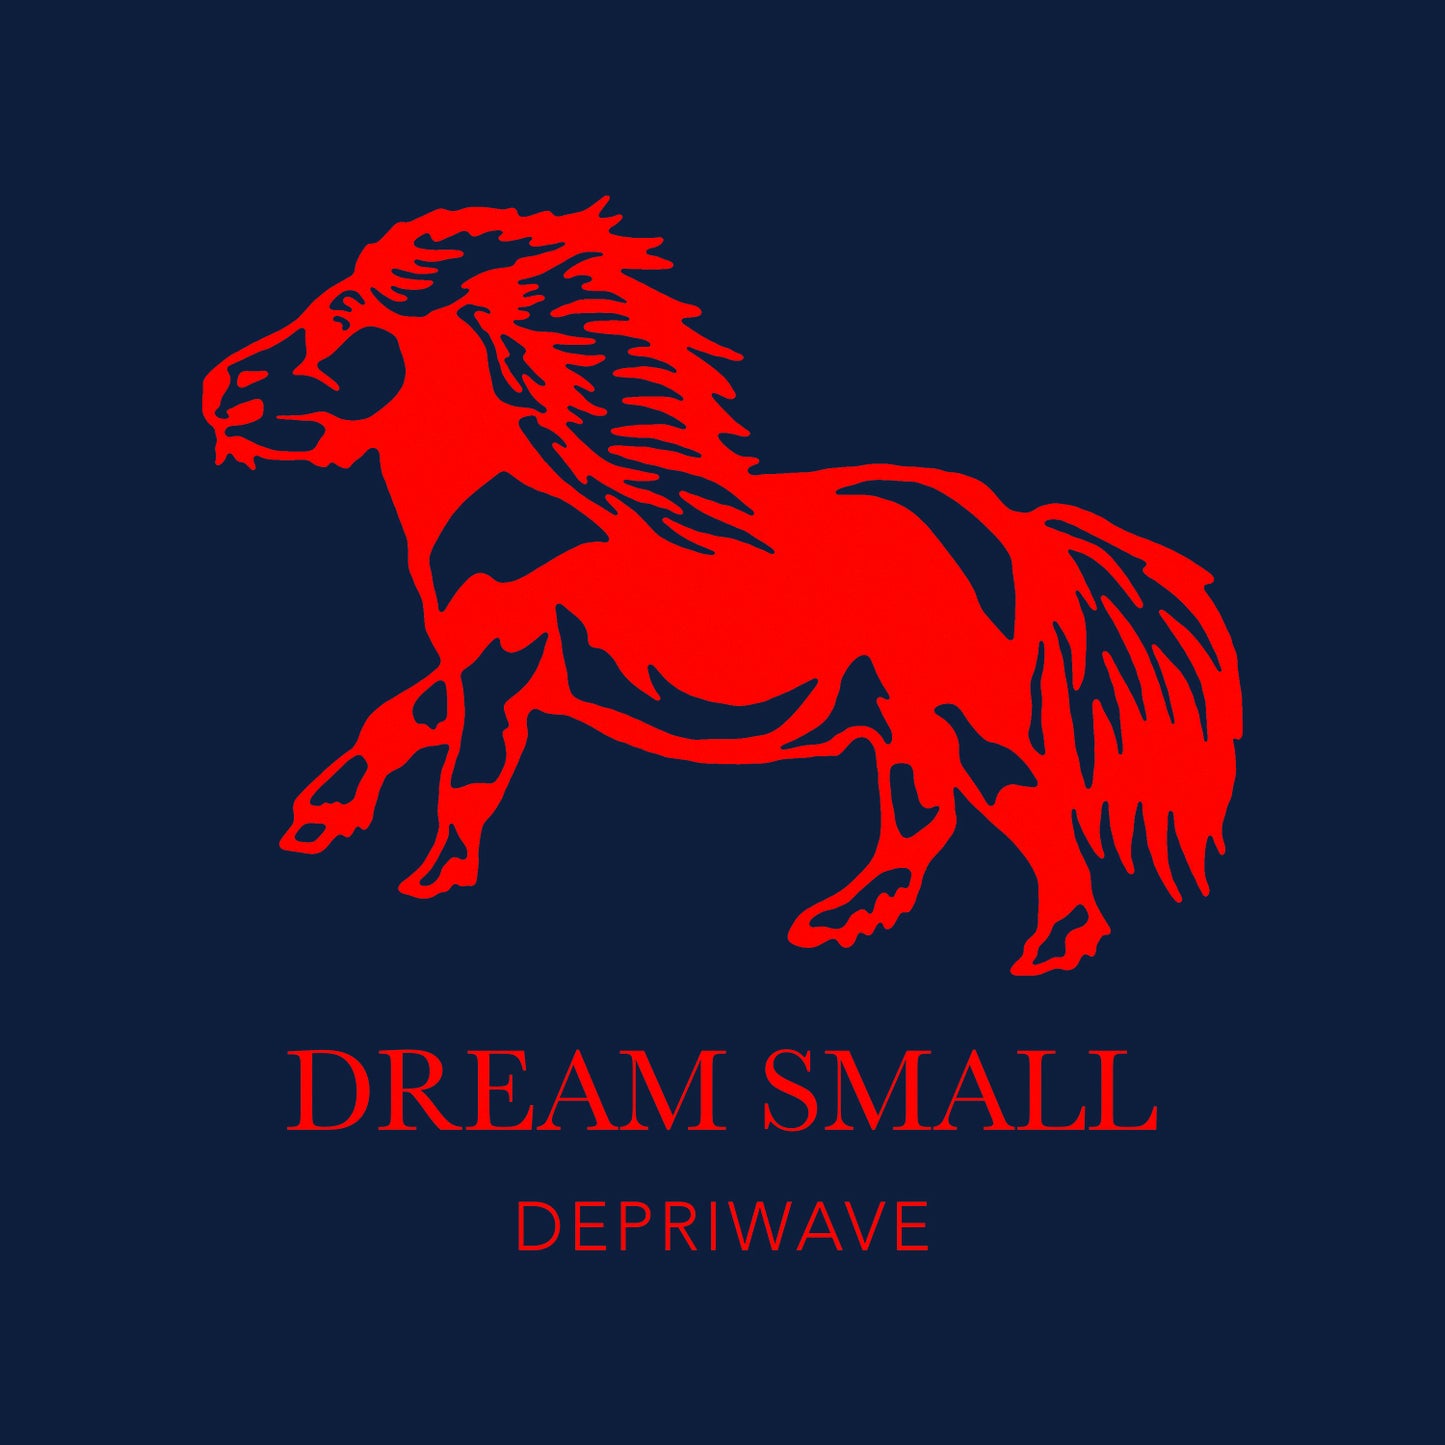 Depriwave Couture - DREAM SMALL sweater